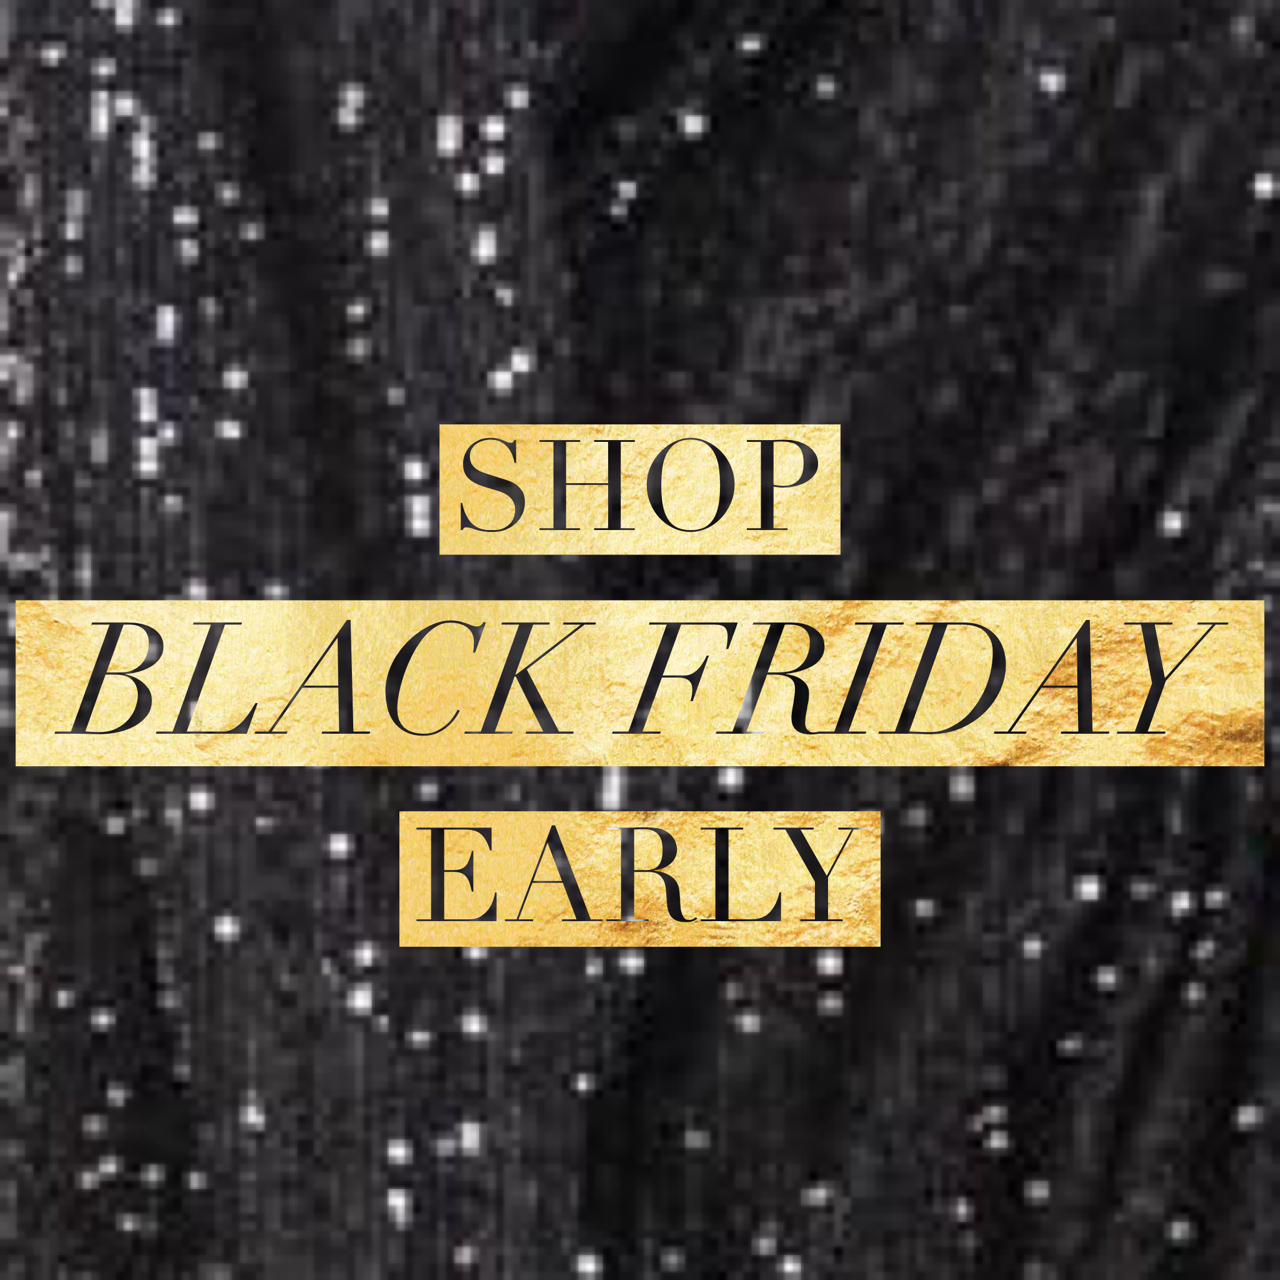 SHHHH!  SHOP BLACK FRIDAY EARLY!  YOU. DON'T WANT TO MISS THESE DEALS....